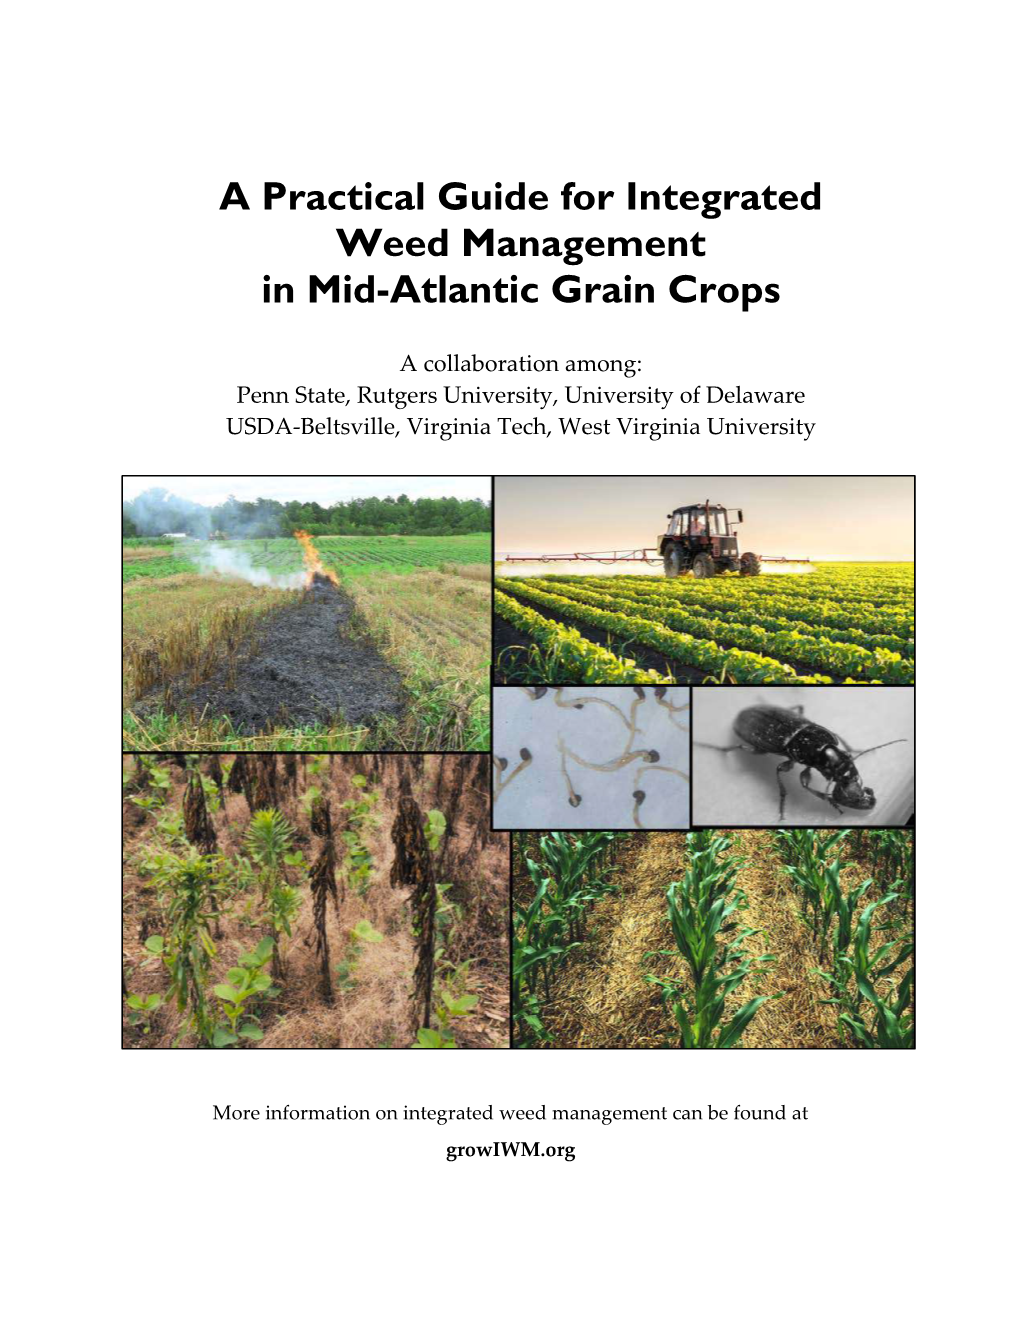 A Practical Guide for Integrated Weed Management in Mid-Atlantic Grain Crops